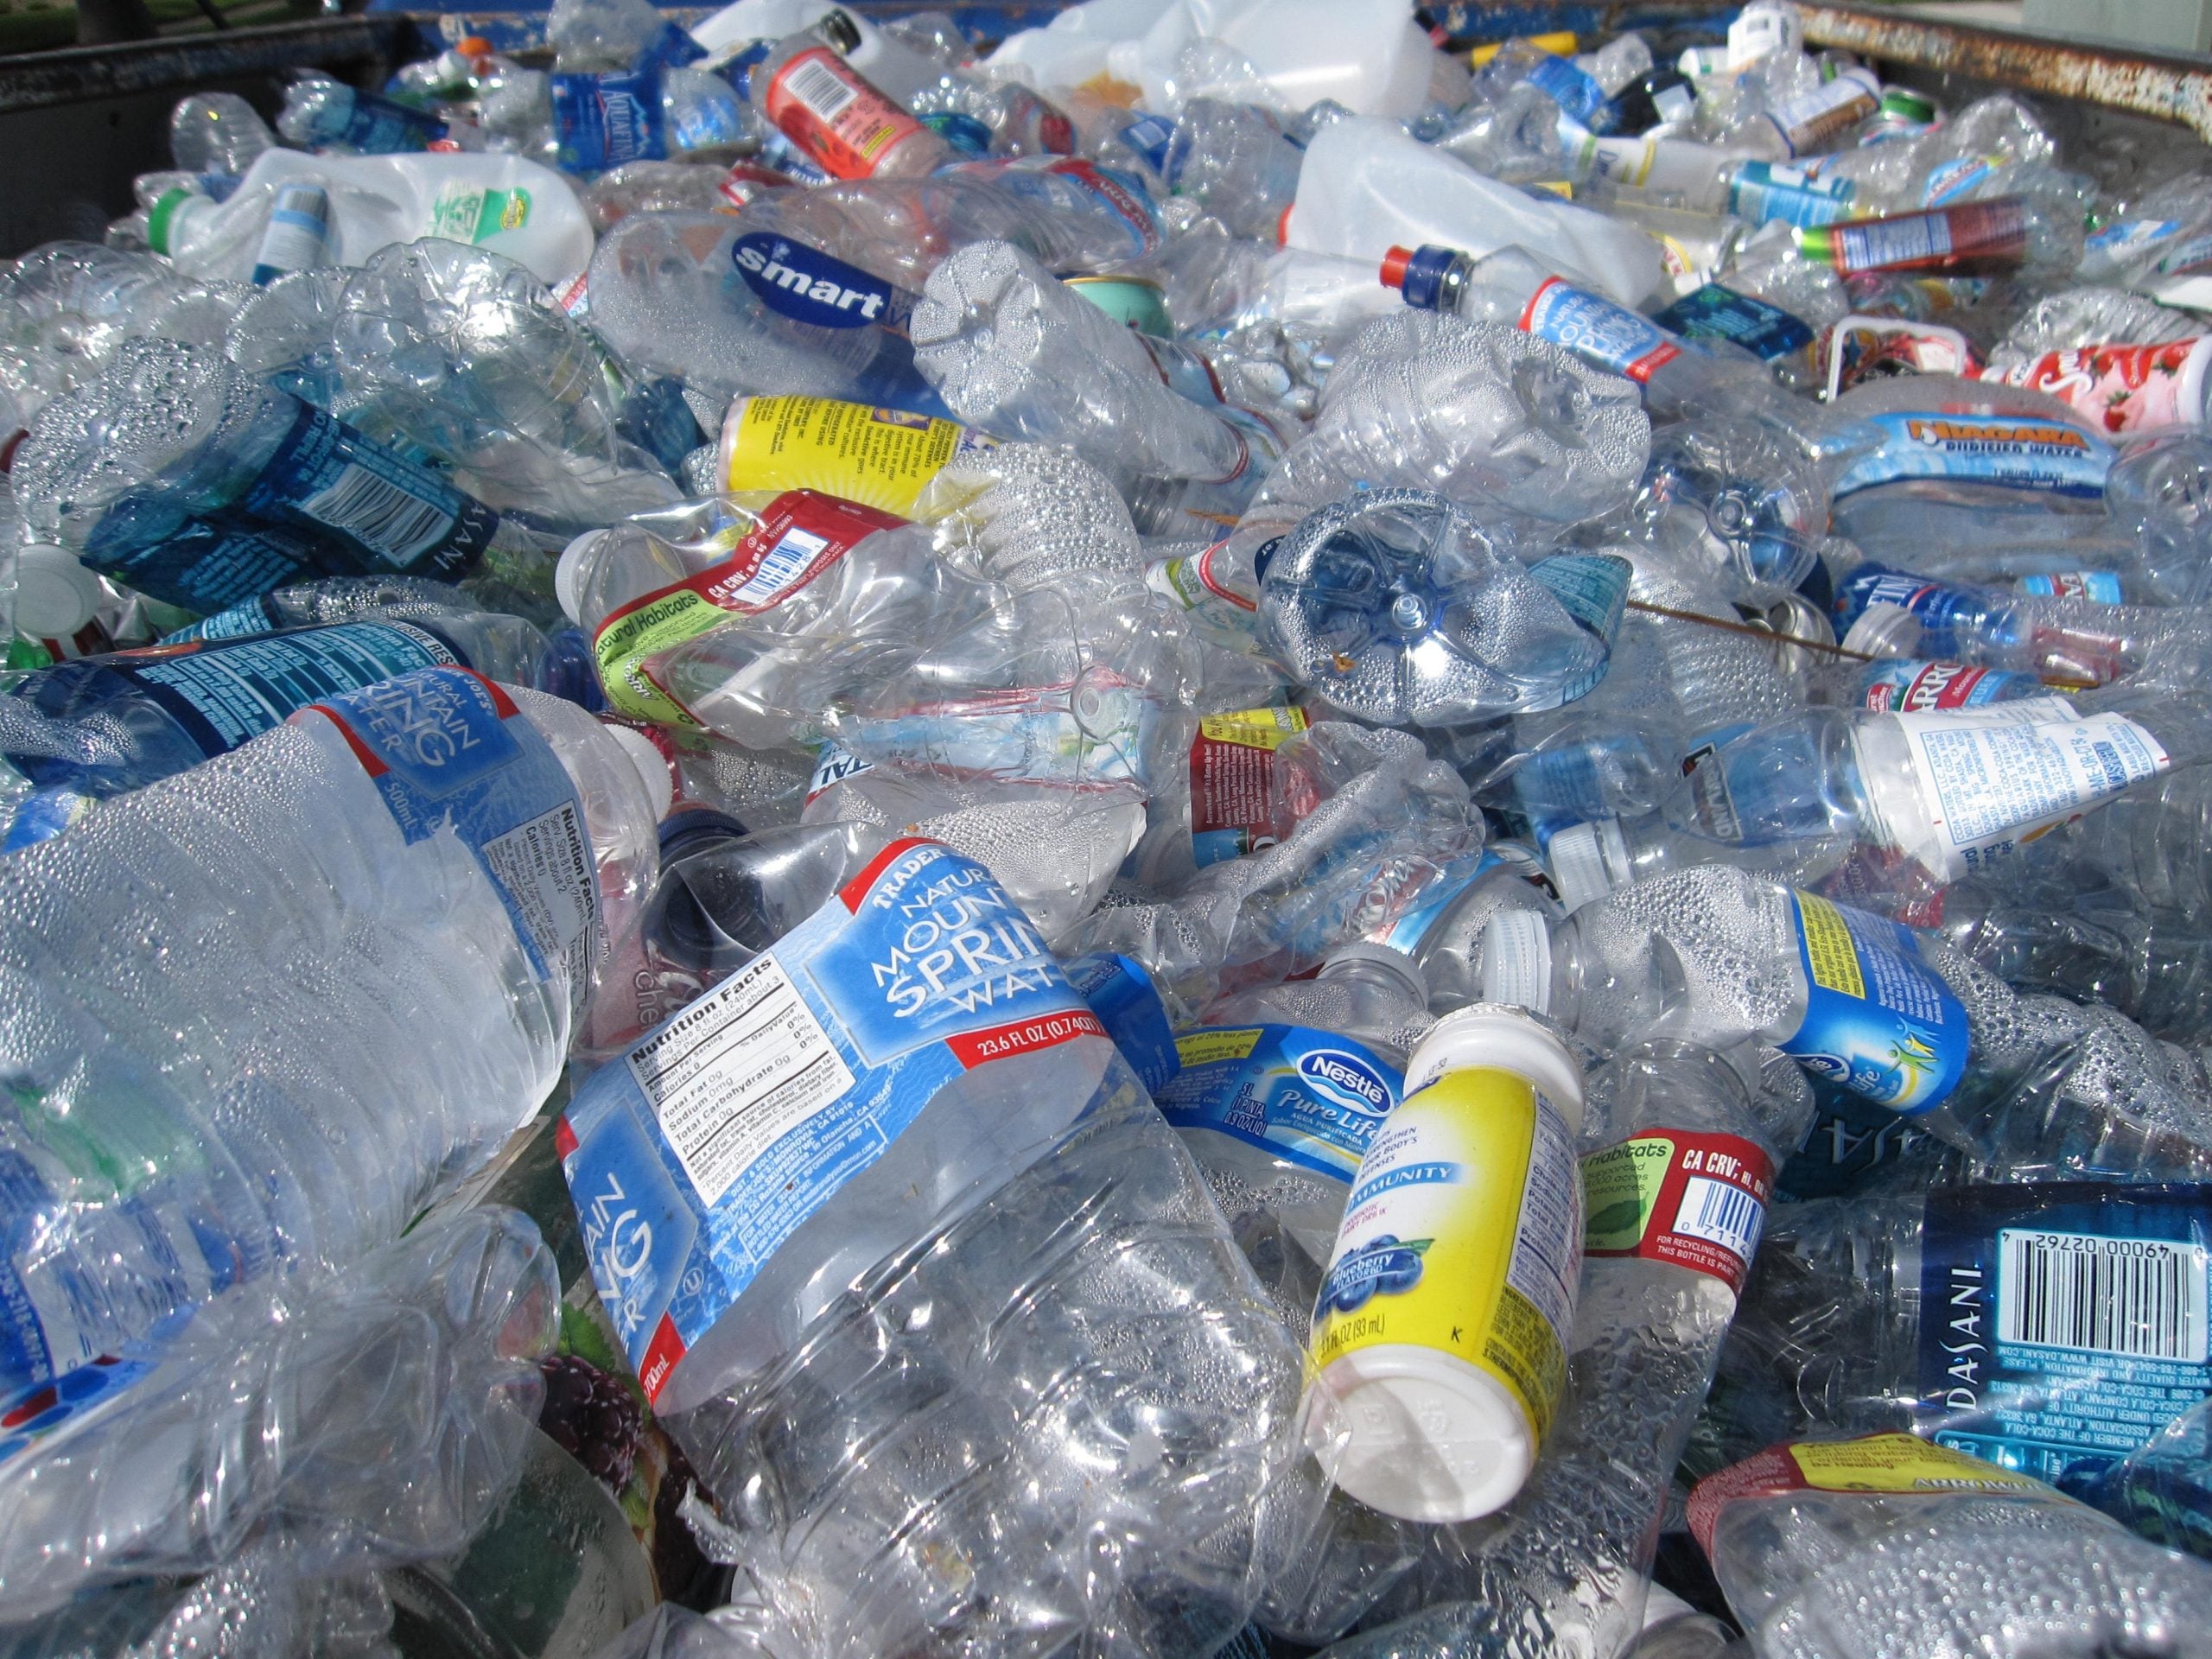 EU introduces plastic waste tax as part of Covid-19 recovery plan